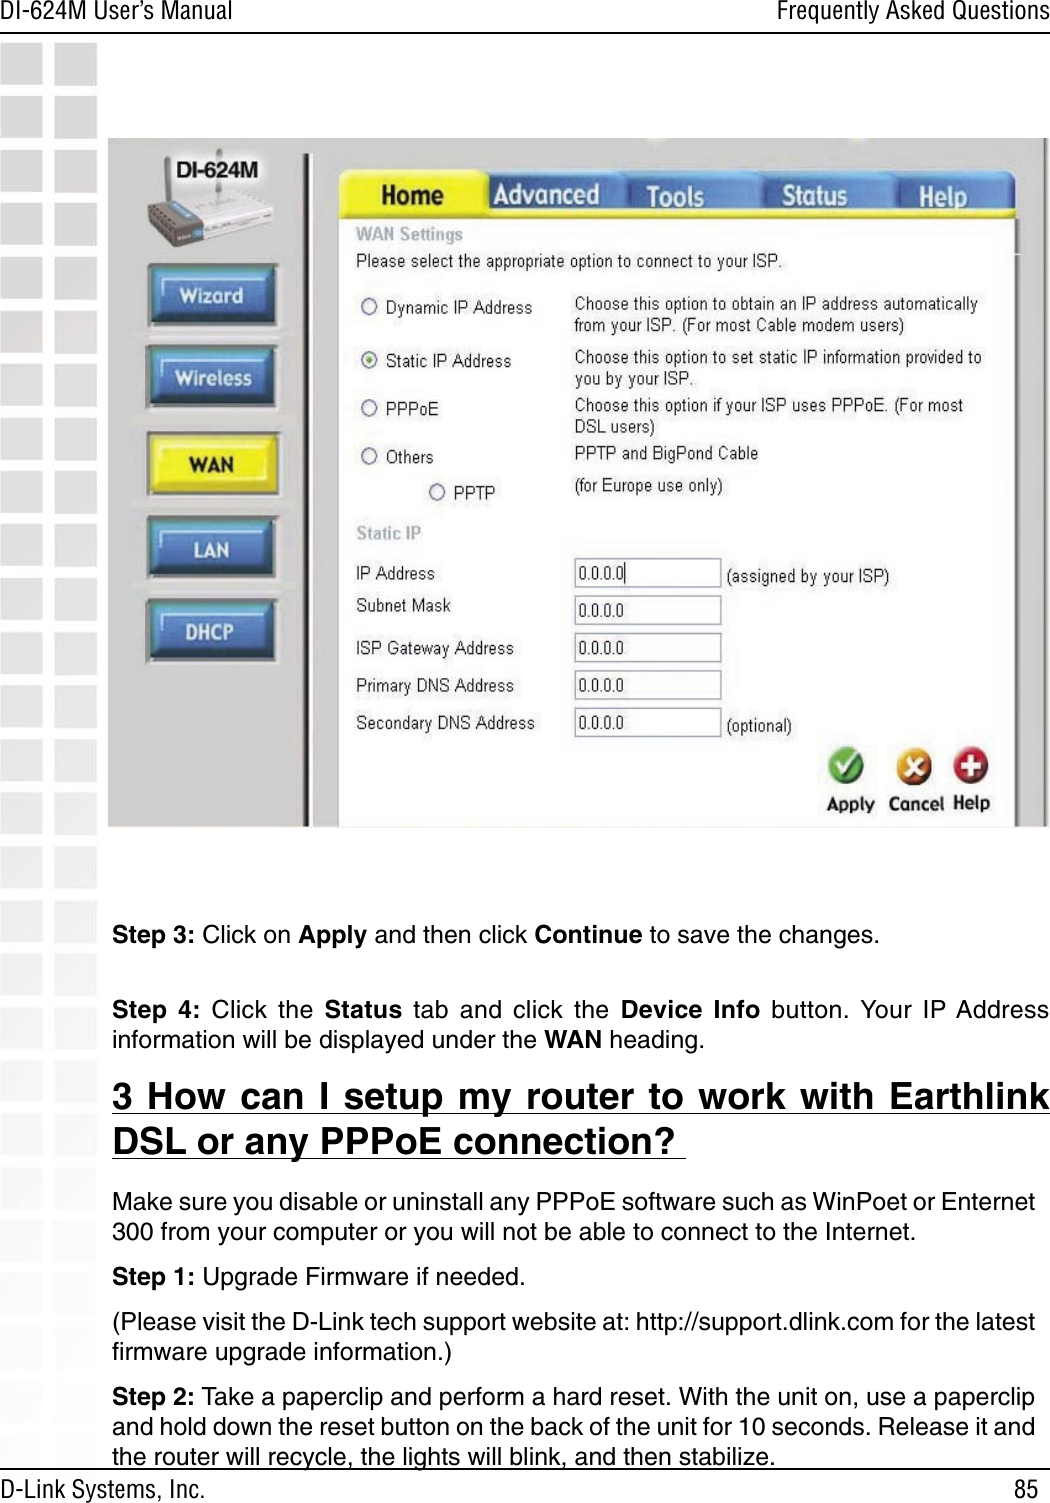 85DI-624M User’s Manual D-Link Systems, Inc.Frequently Asked QuestionsStep 3: Click on Apply and then click Continue to save the changes.  Step  4:  Click  the  Status  tab  and  click  the  Device  Info  button. Your  IP Address information will be displayed under the WAN heading.3 How can I setup my router to work with Earthlink DSL or any PPPoE connection? Make sure you disable or uninstall any PPPoE software such as WinPoet or Enternet 300 from your computer or you will not be able to connect to the Internet.  Step 1: Upgrade Firmware if needed.  (Please visit the D-Link tech support website at: http://support.dlink.com for the latest ﬁrmware upgrade information.) Step 2: Take a paperclip and perform a hard reset. With the unit on, use a paperclip and hold down the reset button on the back of the unit for 10 seconds. Release it and the router will recycle, the lights will blink, and then stabilize.  